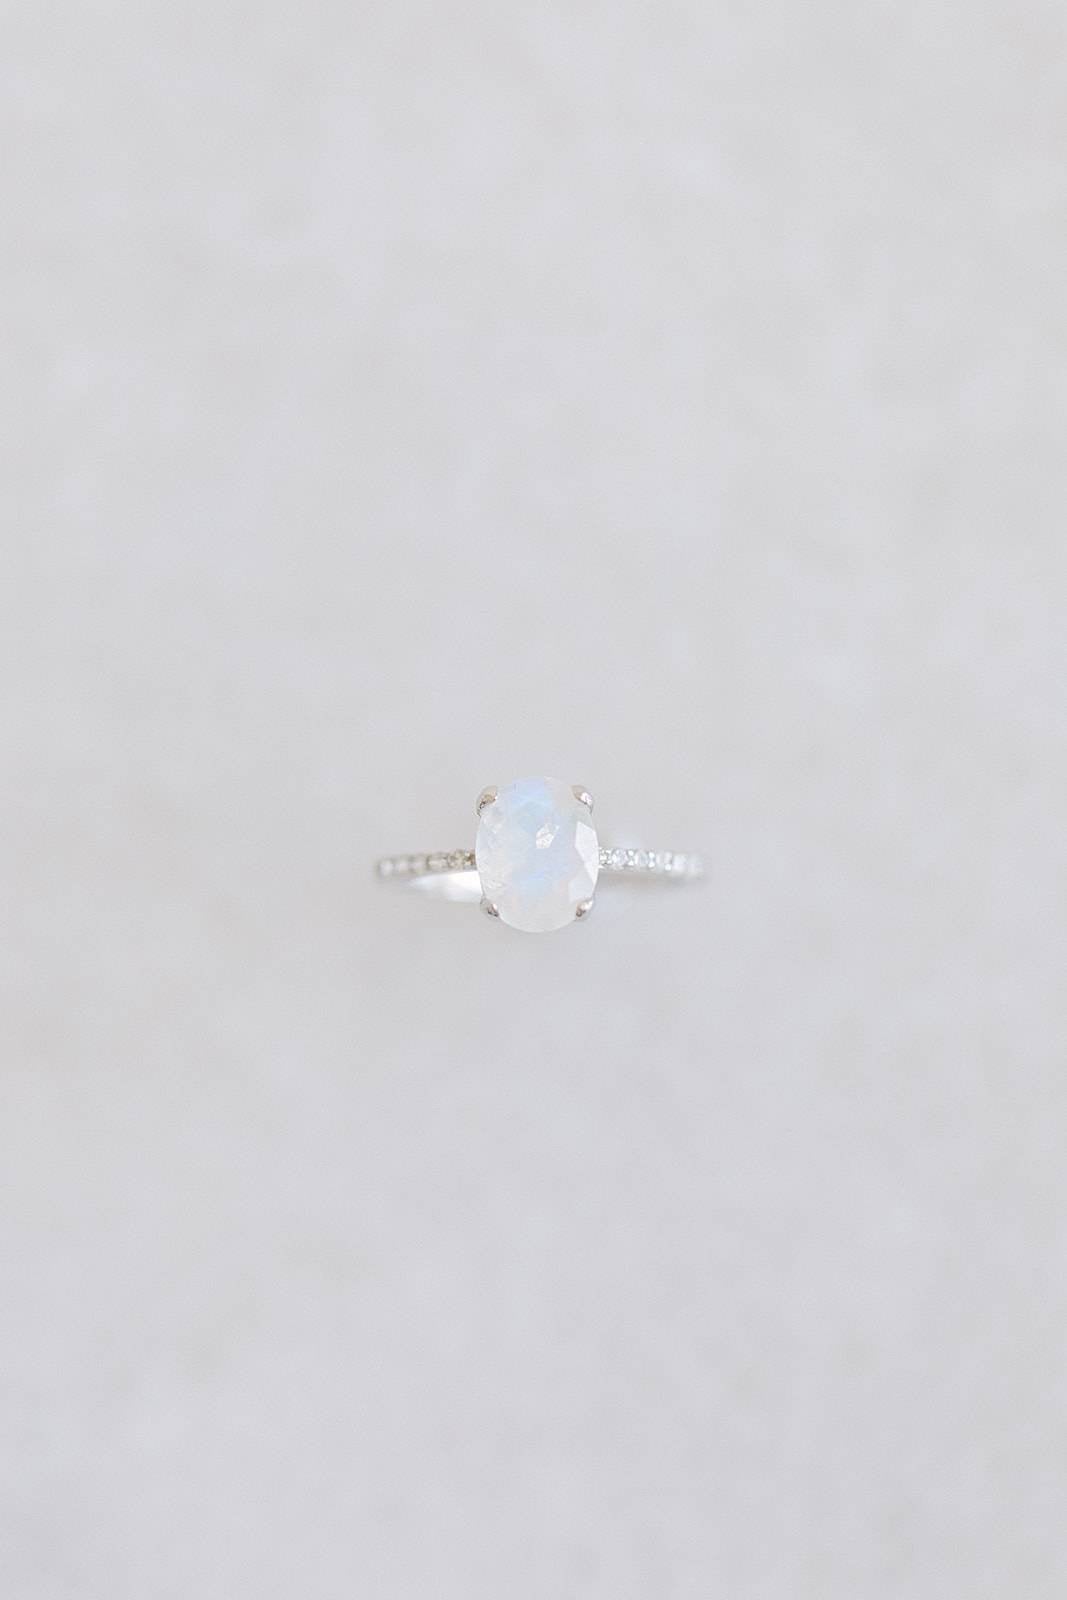 Moonstone Ring - Fine Jewelry Collection